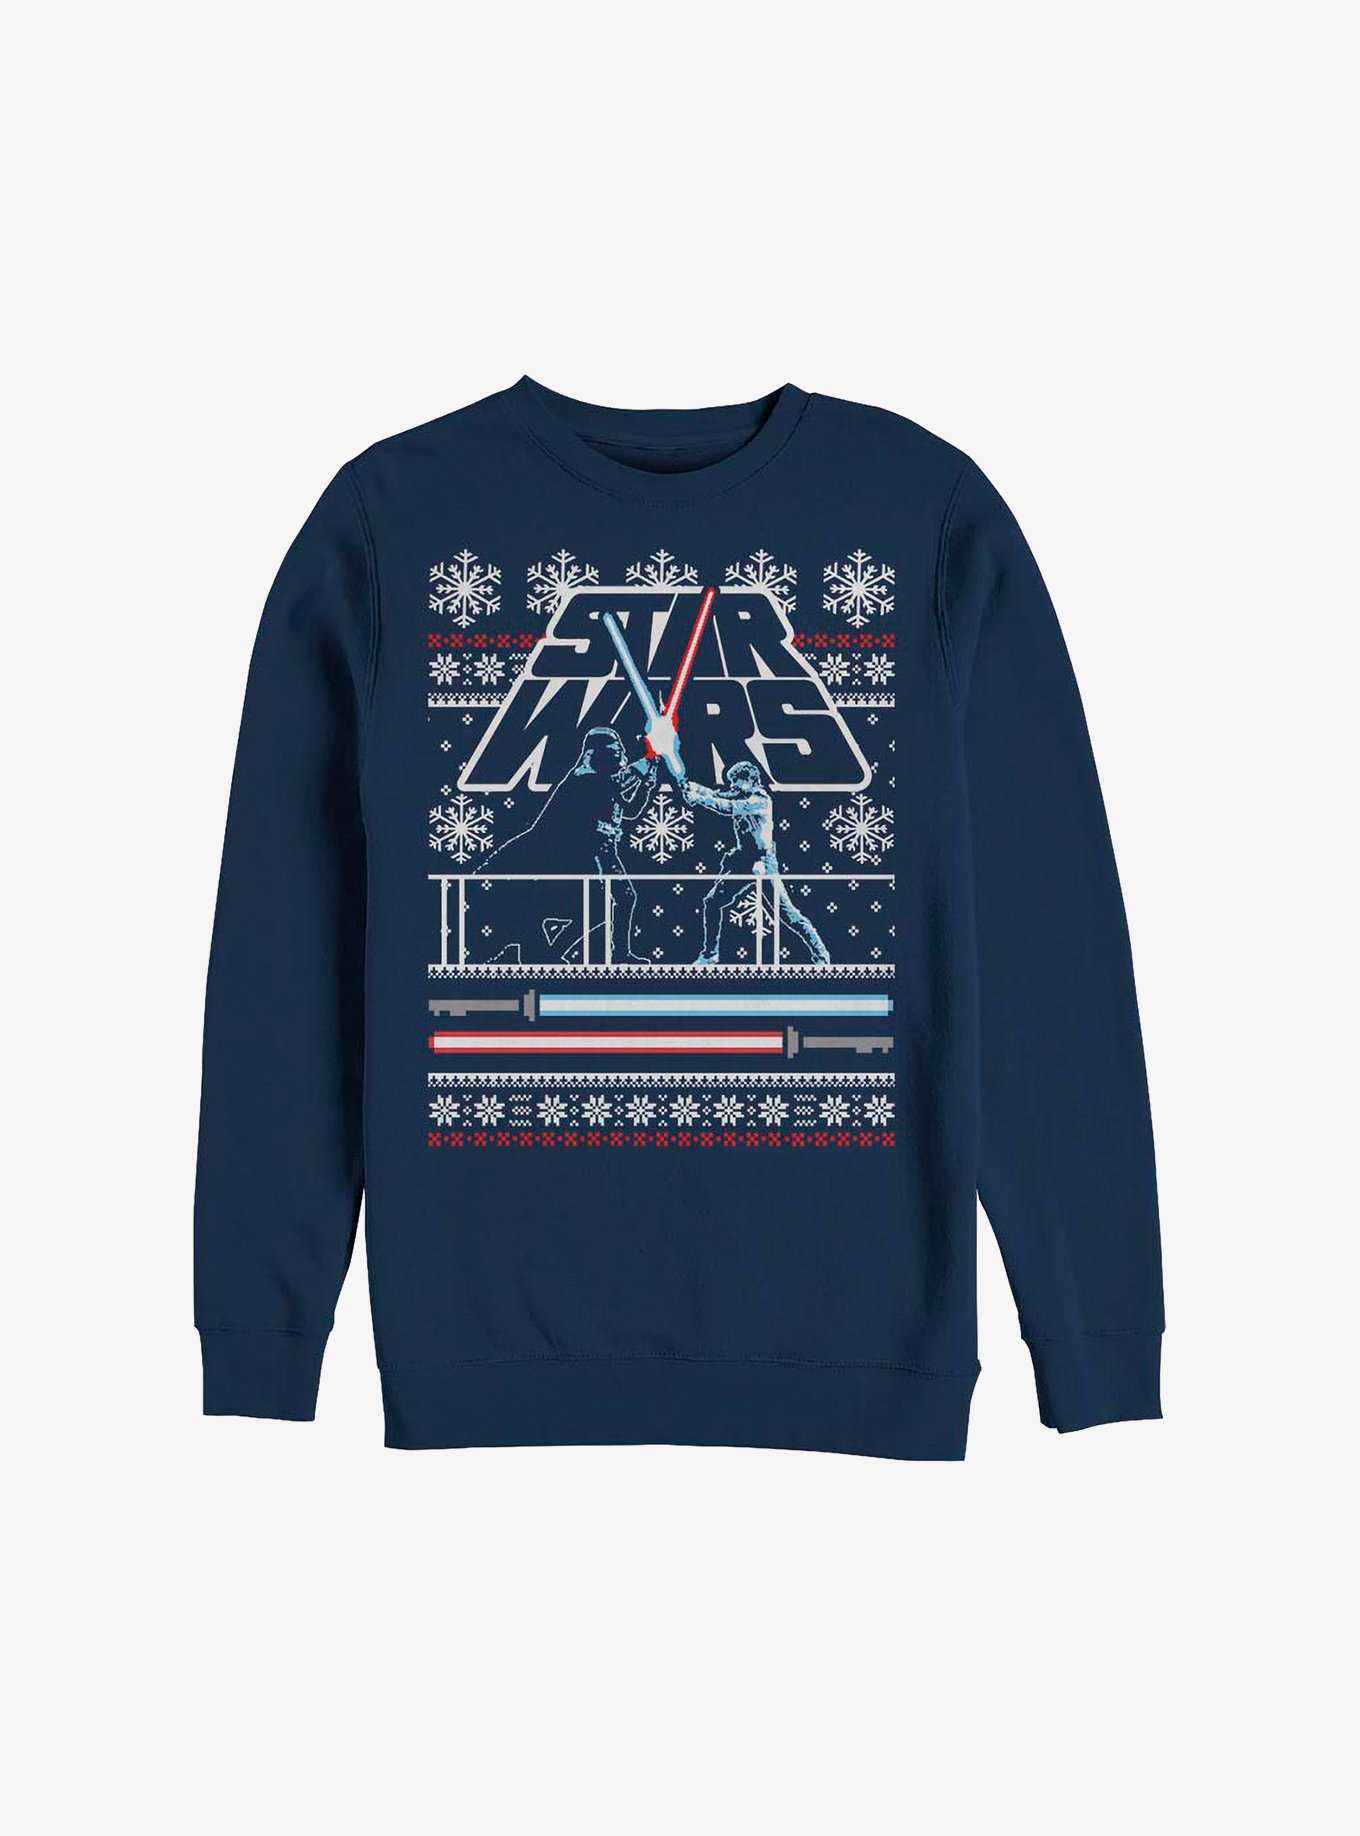 Star Wars Holiday Face Off Ugly Christmas Sweater  Sweatshirt, , hi-res